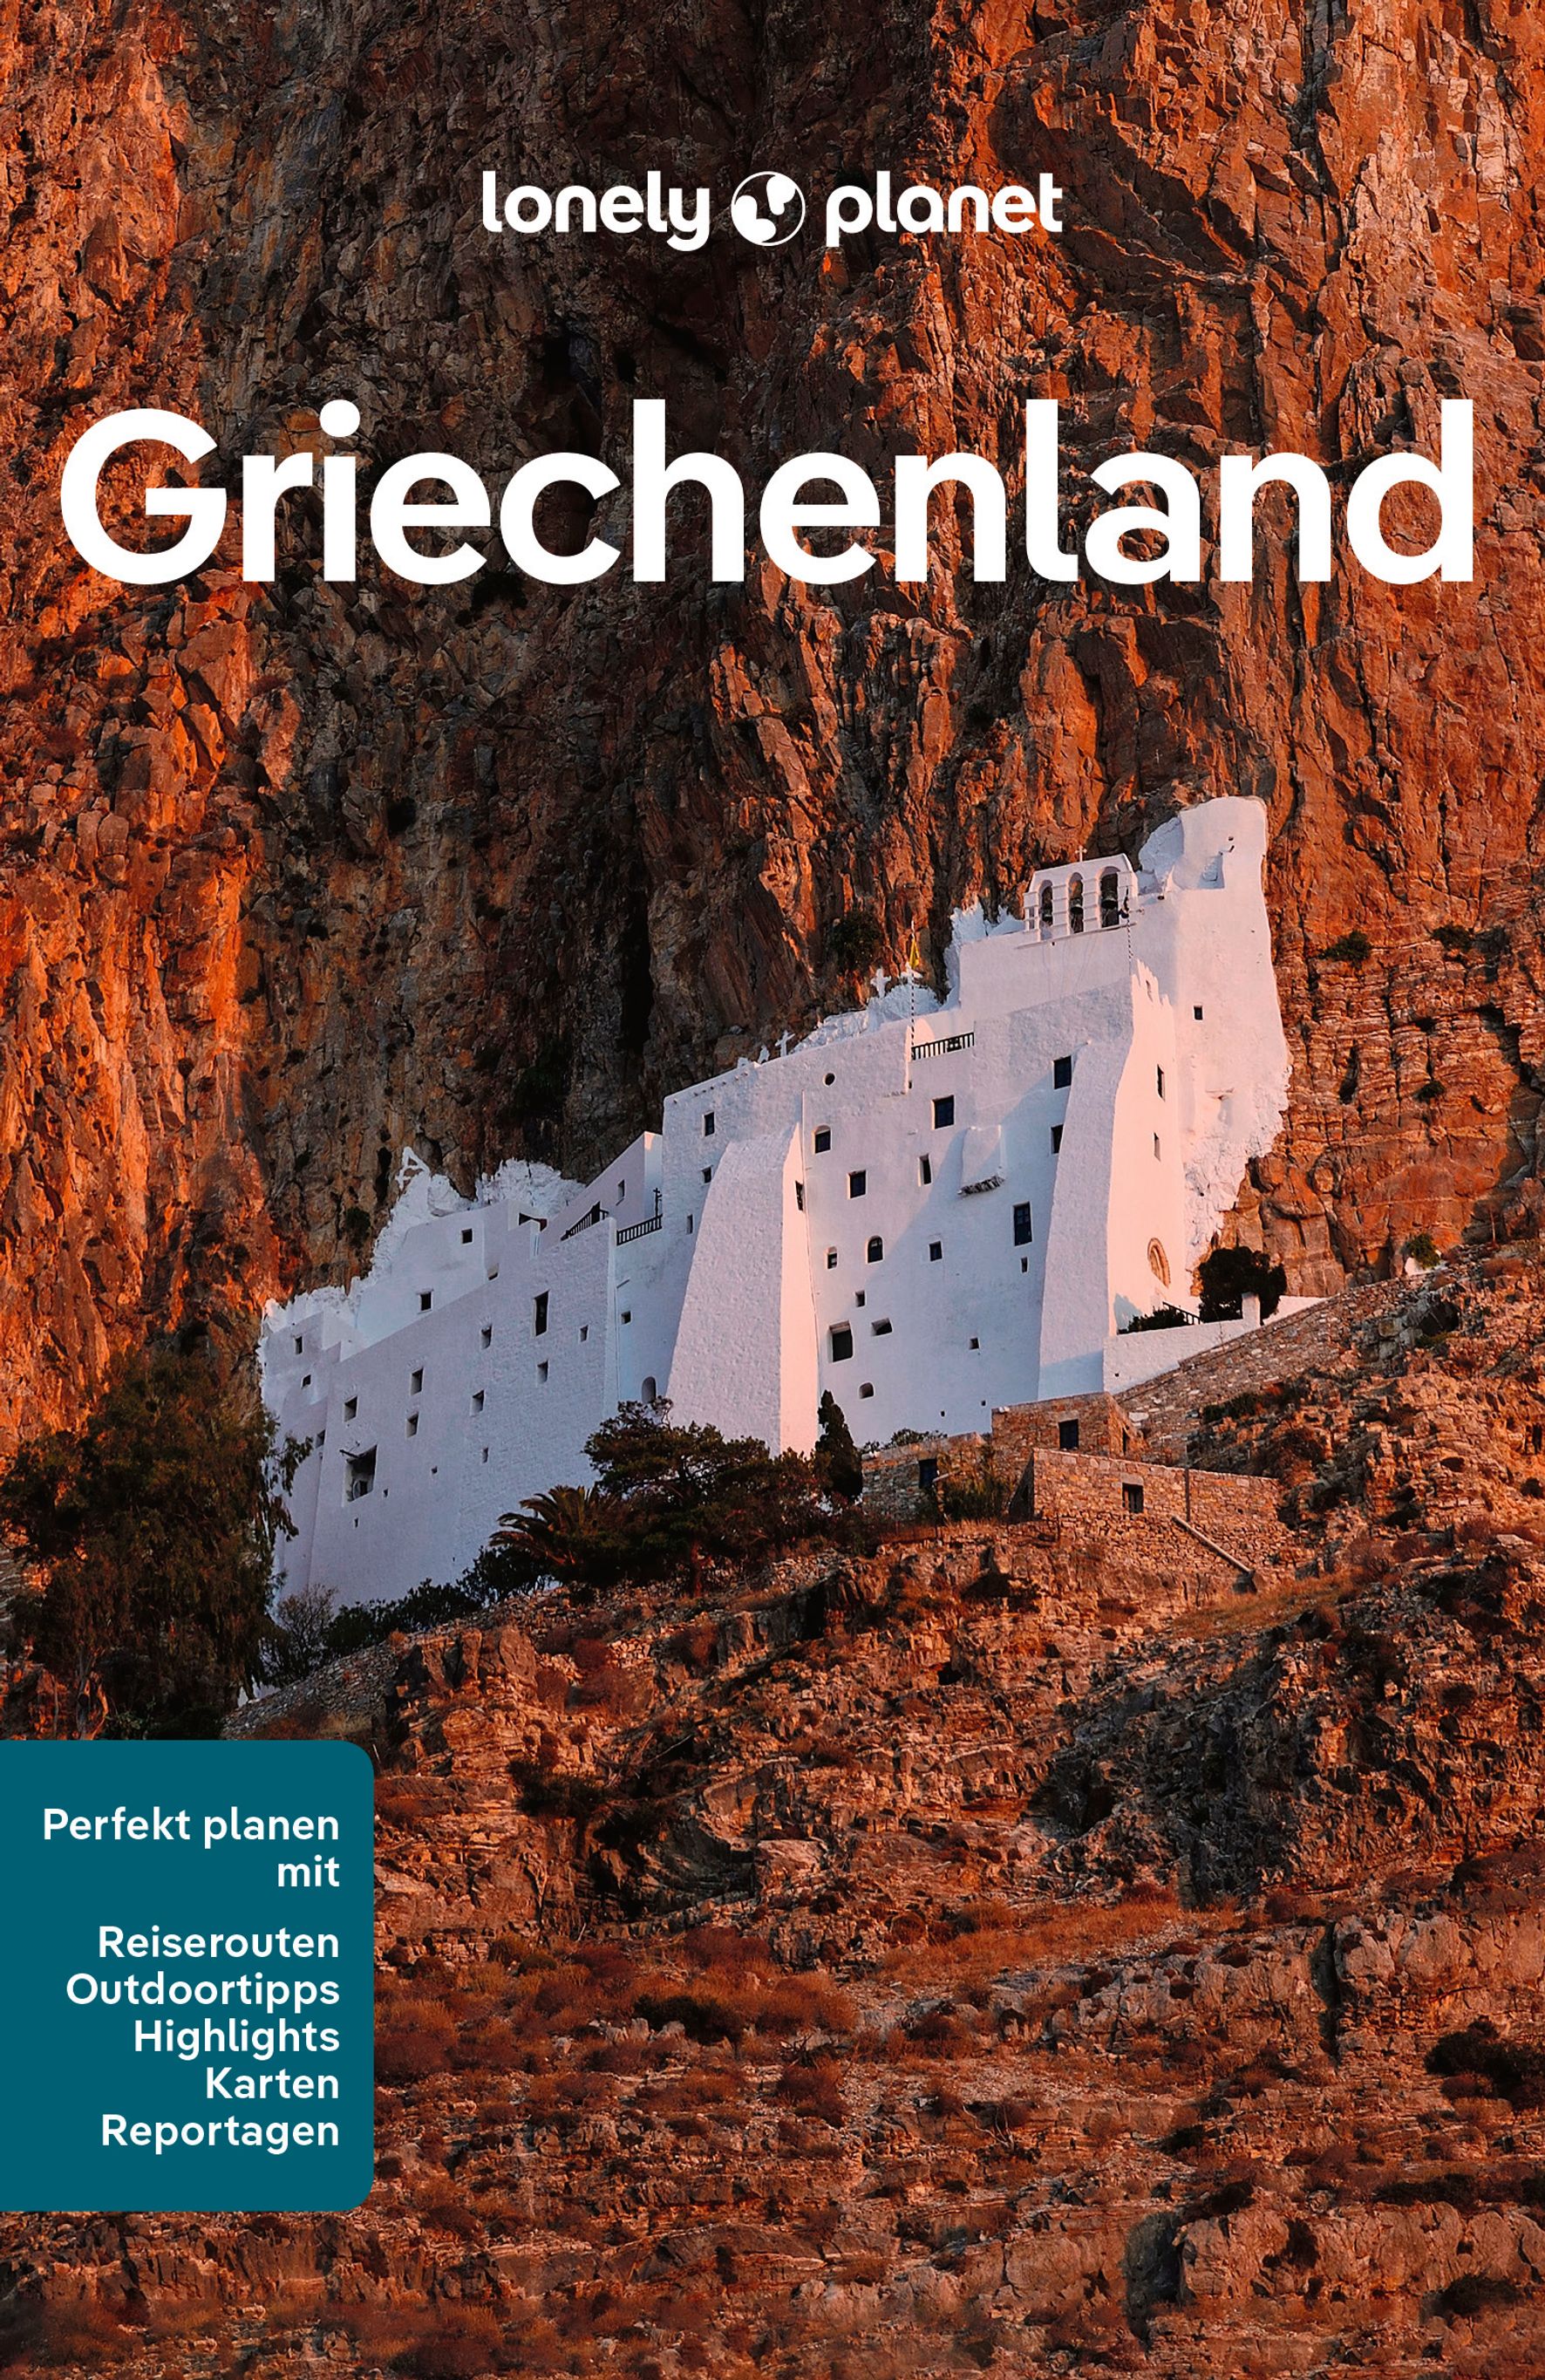 Lonely Planet Griechenland (eBook)